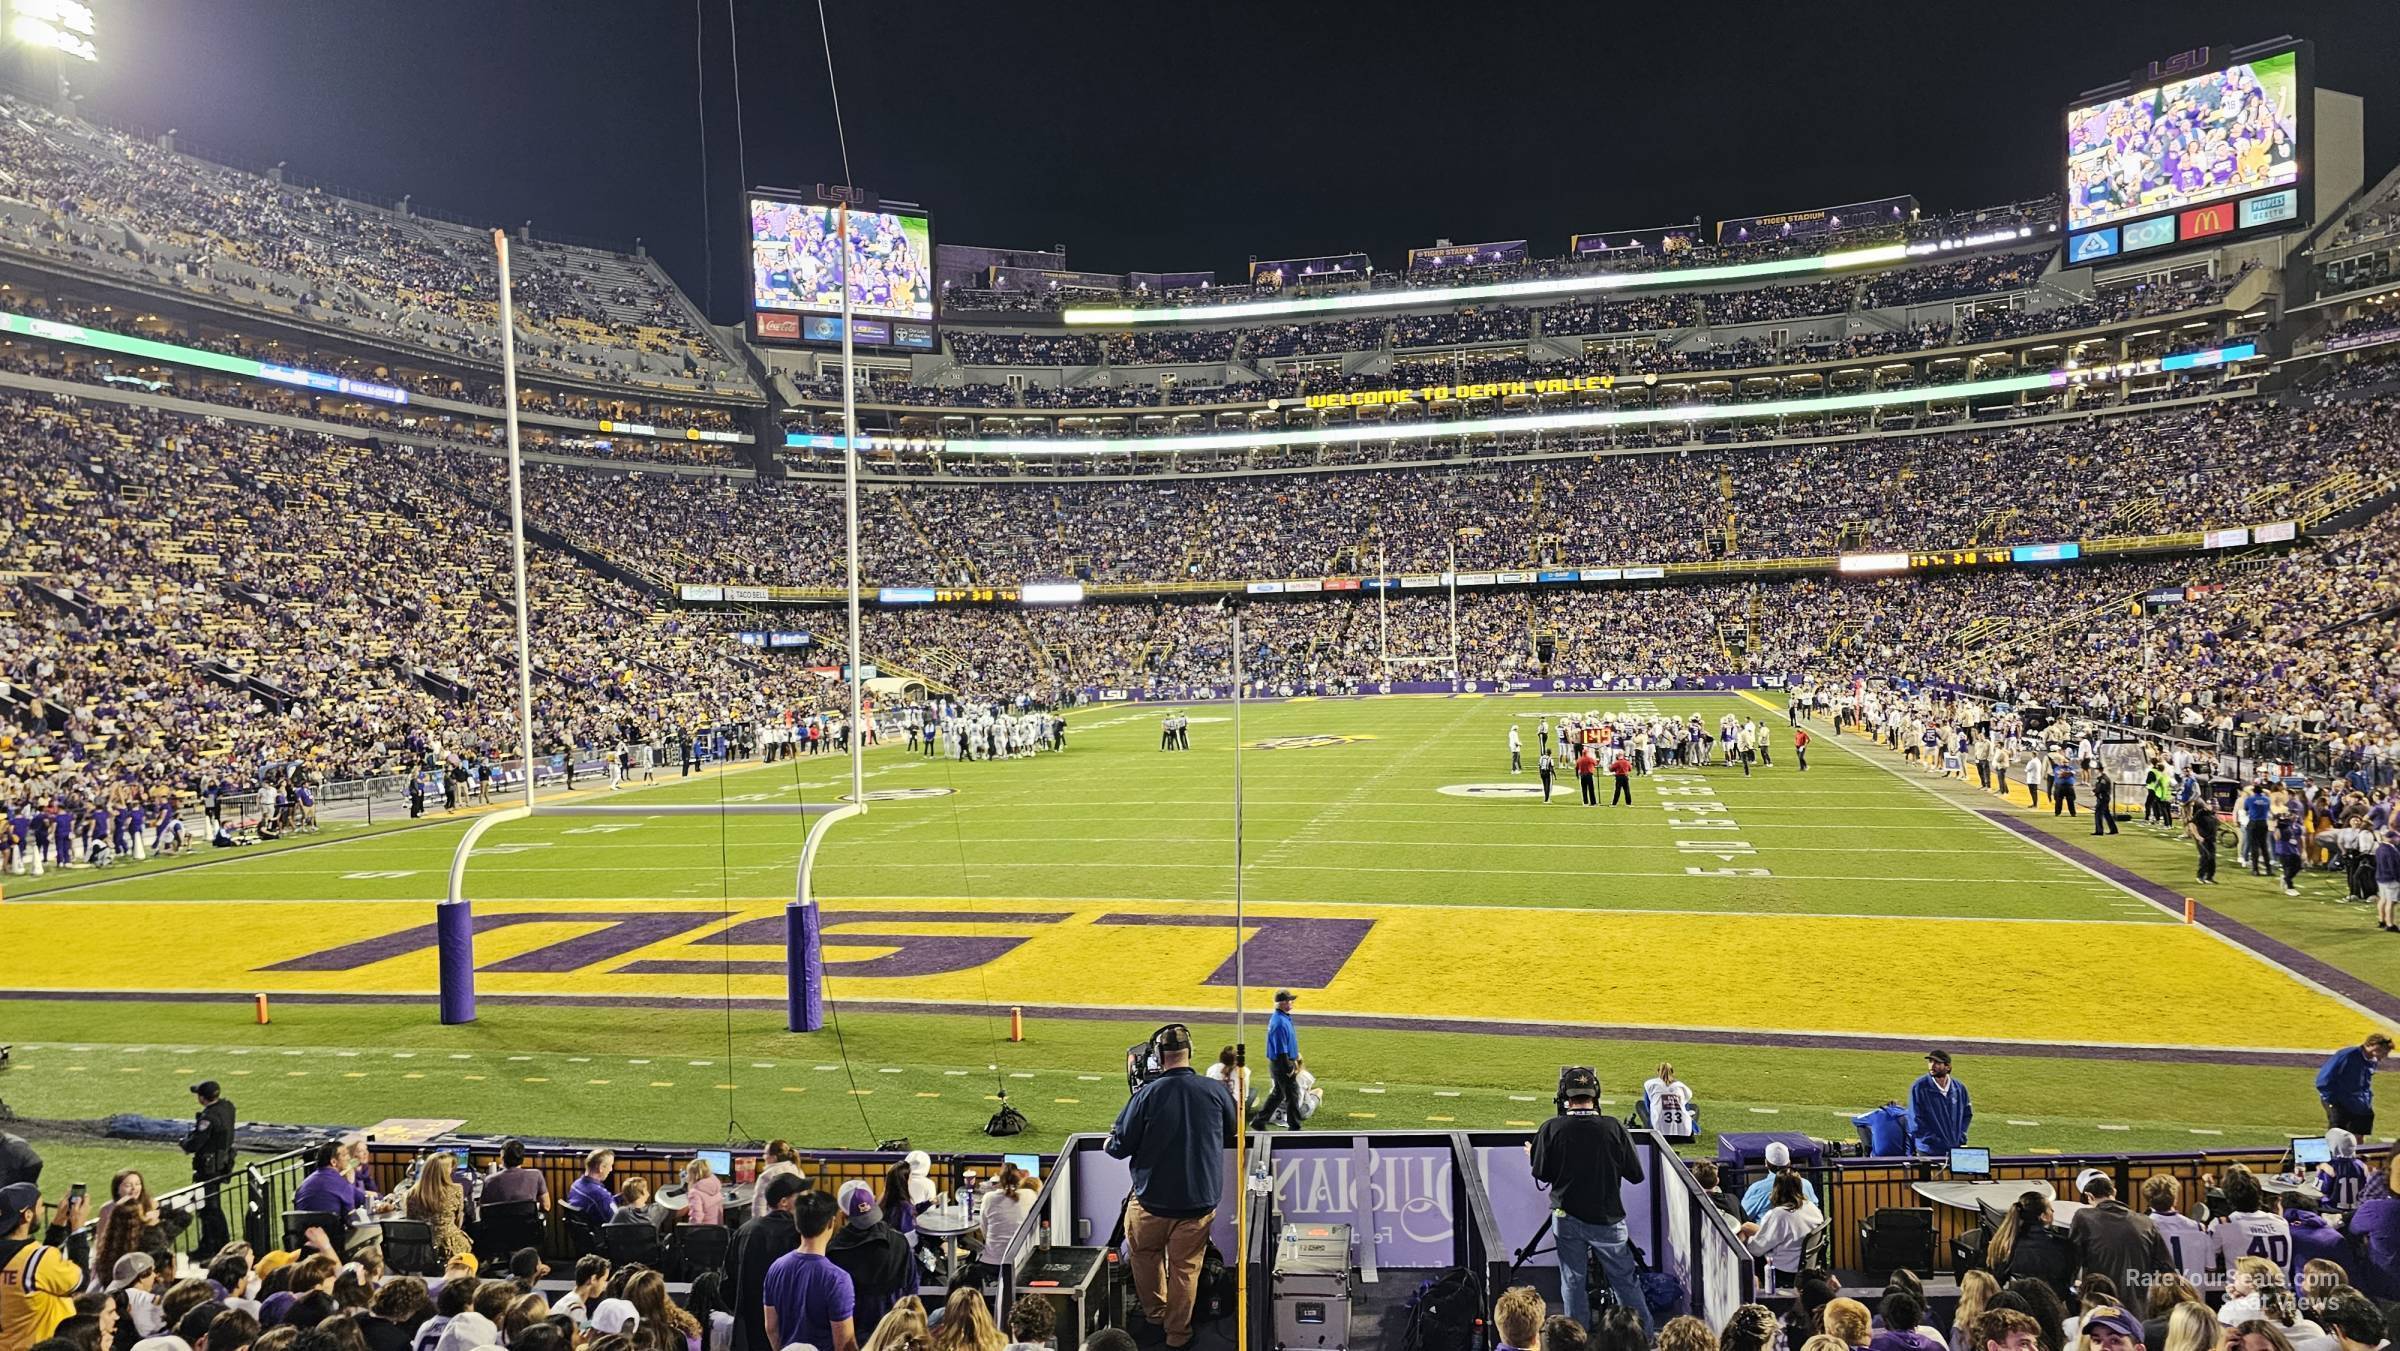 section 217, row 1 seat view  - tiger stadium